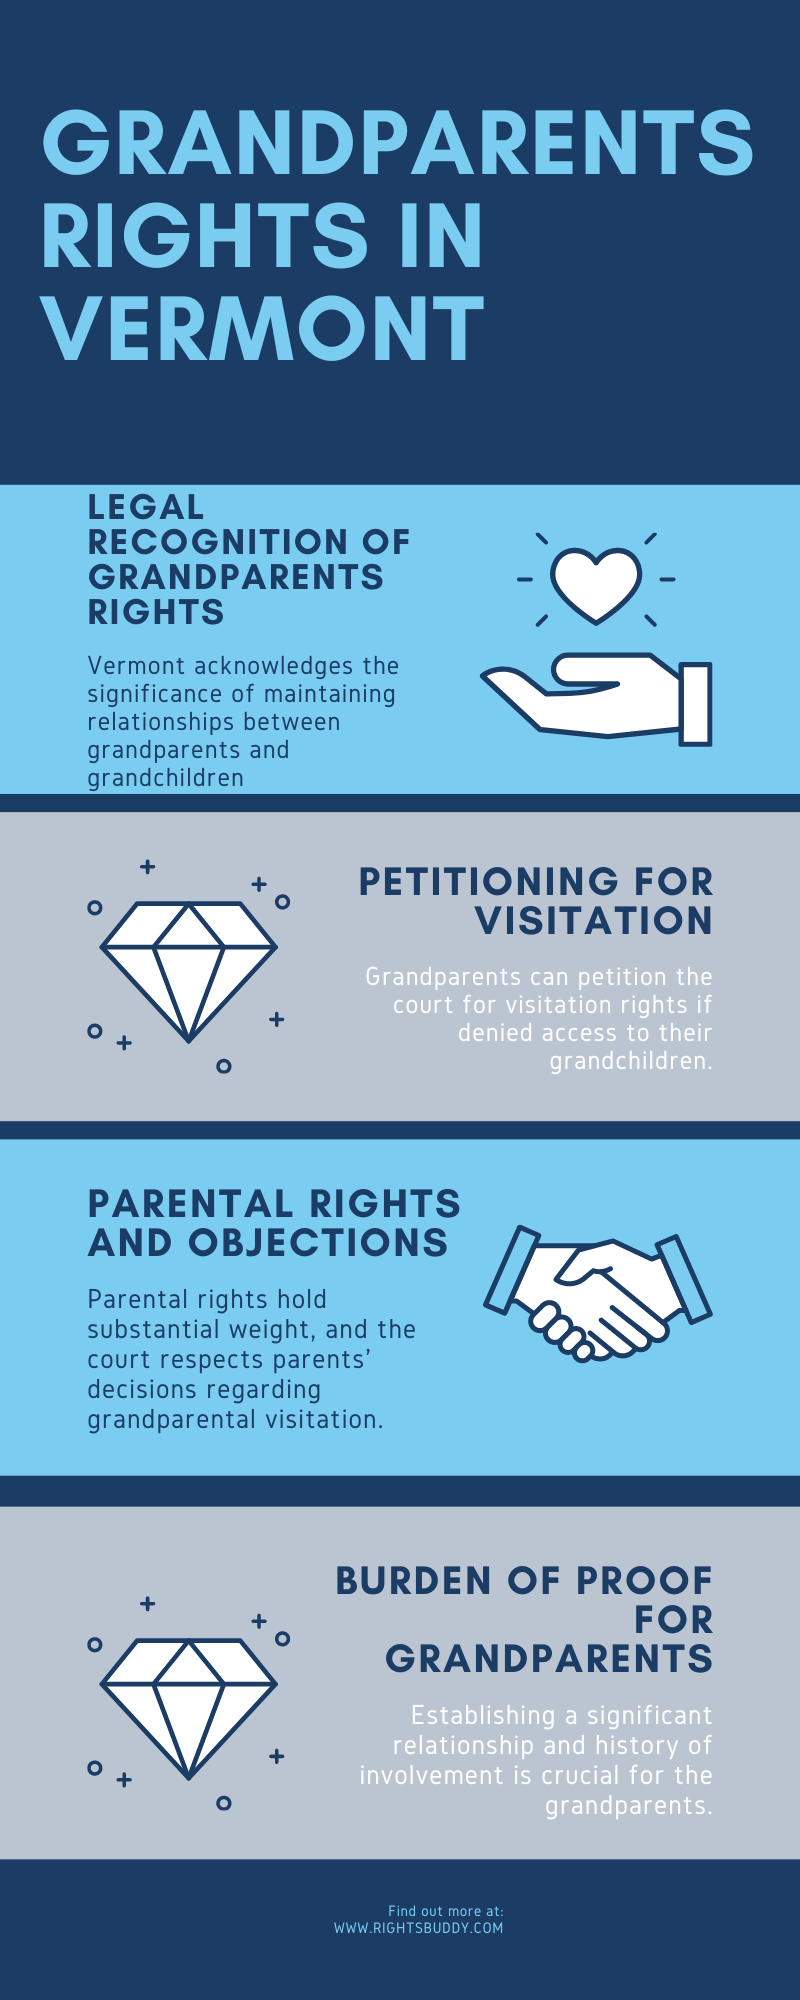 Grandparents Rights in Vermont